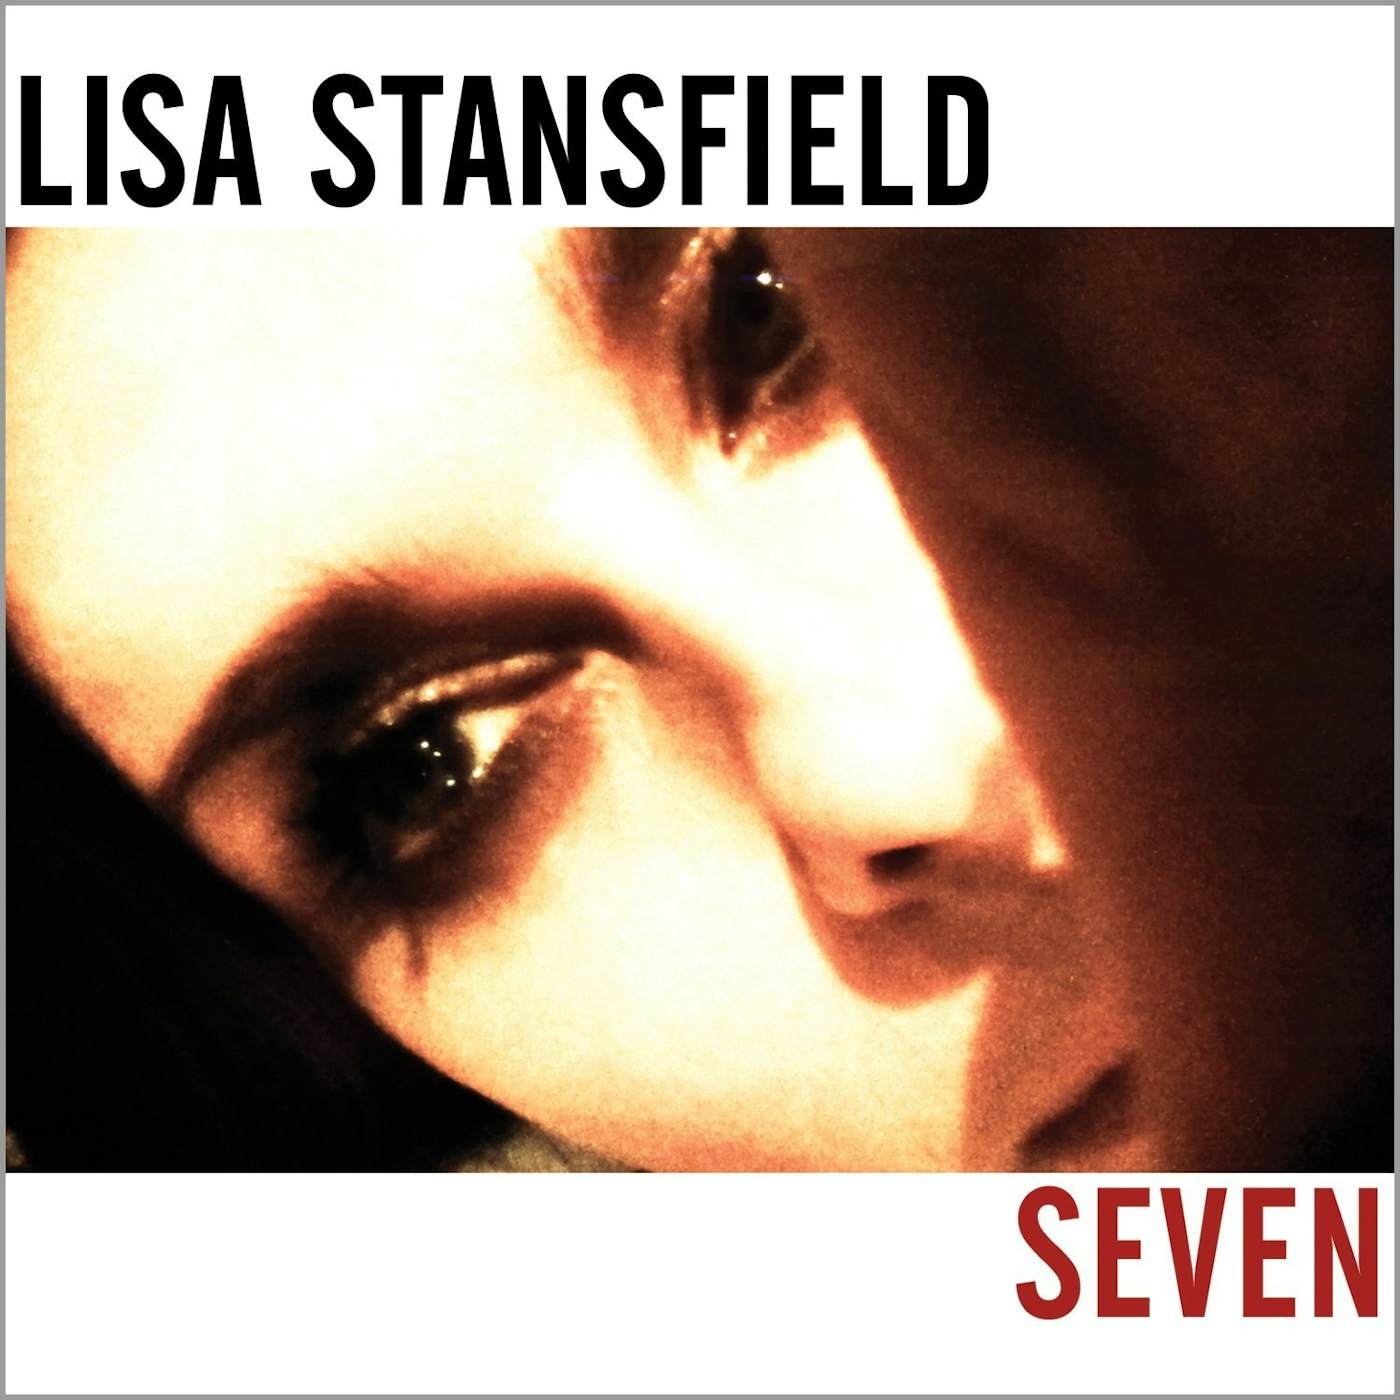 Lisa Stansfield SEVEN (EXPANDED EDITION) CD